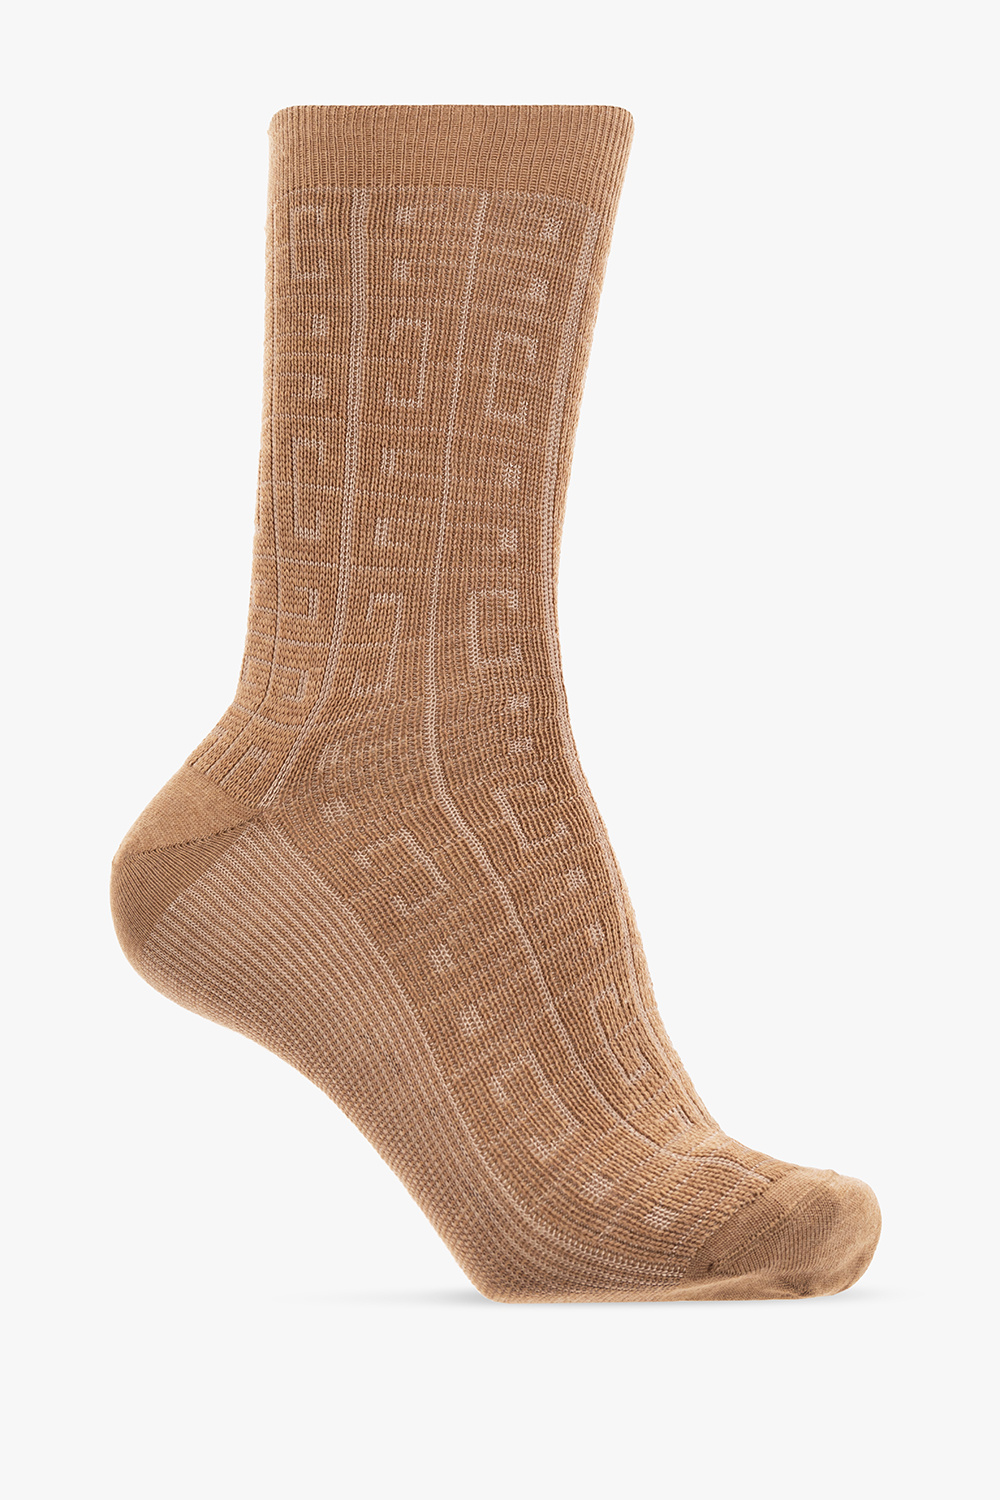 givenchy cotton Socks with monogram